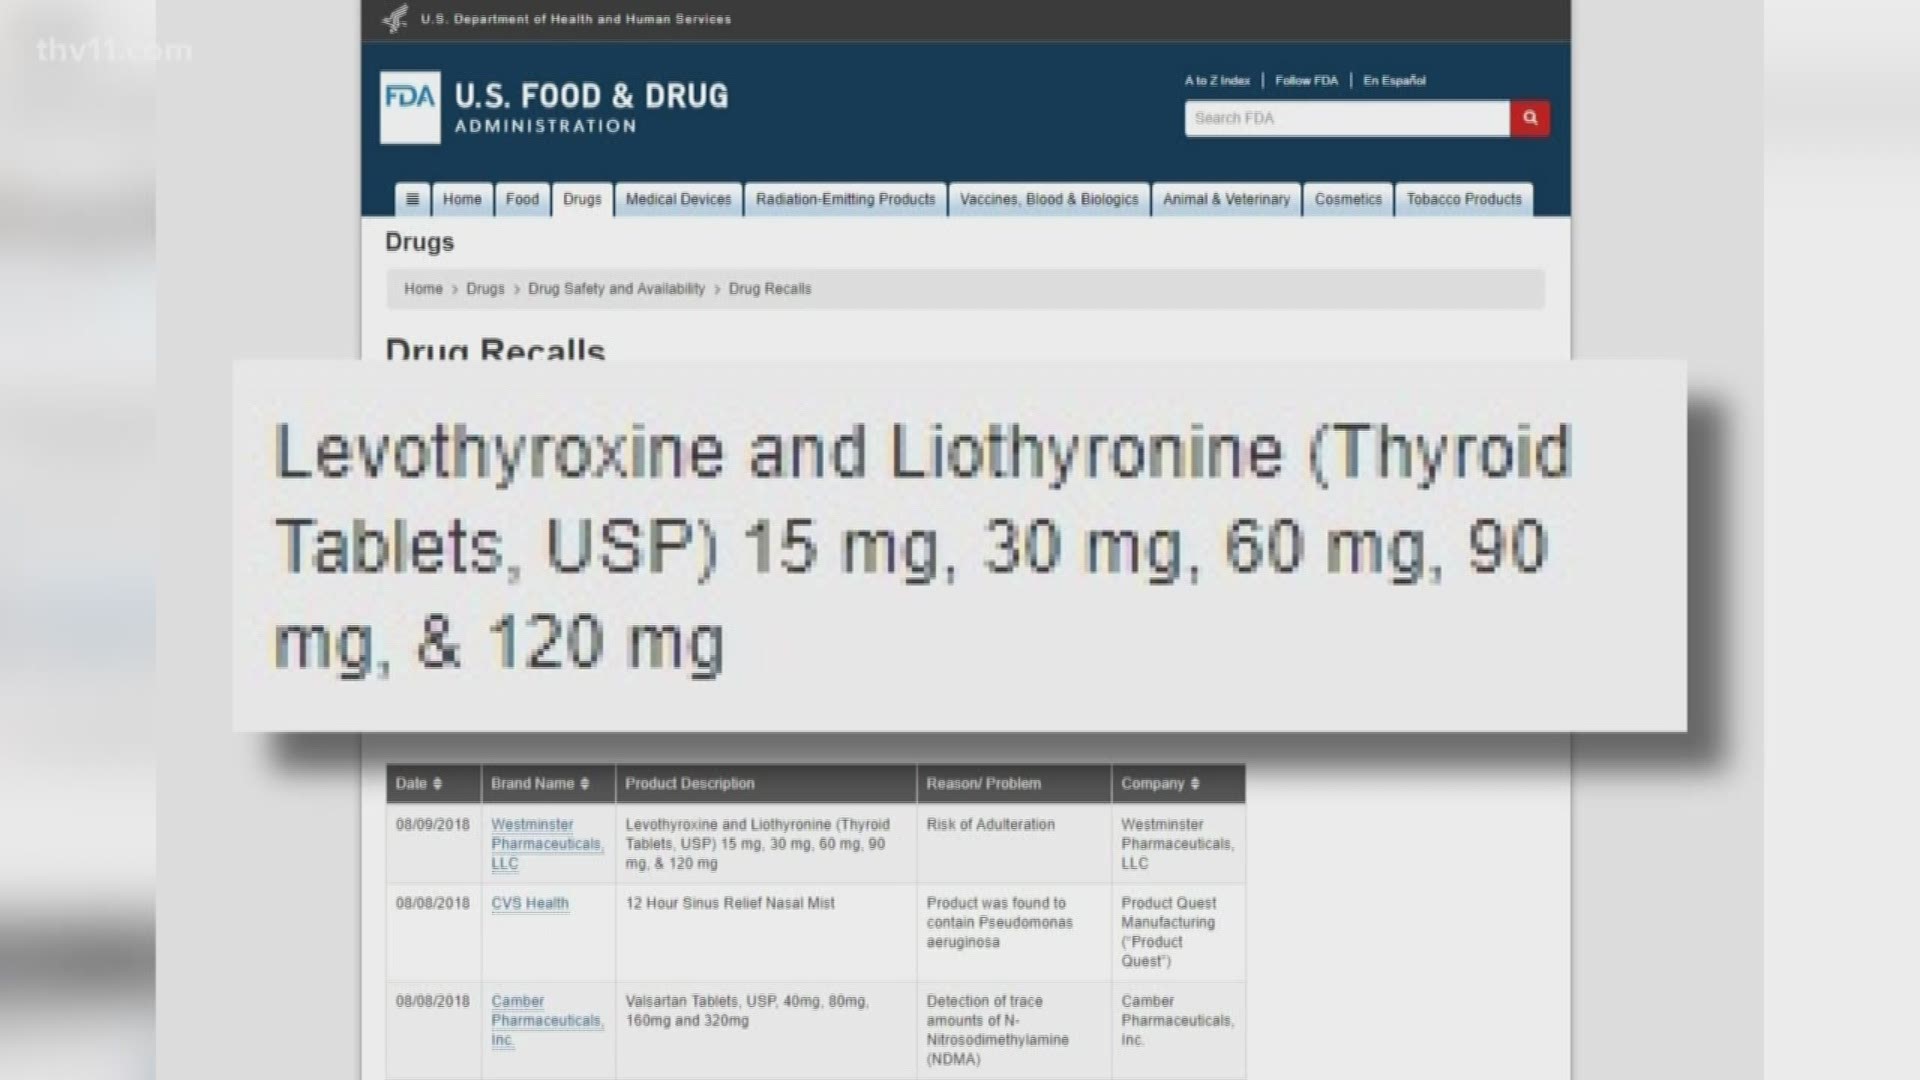 The tablet forms of Levothyroxine and Liothyronine are being recalled because of possible contamination.